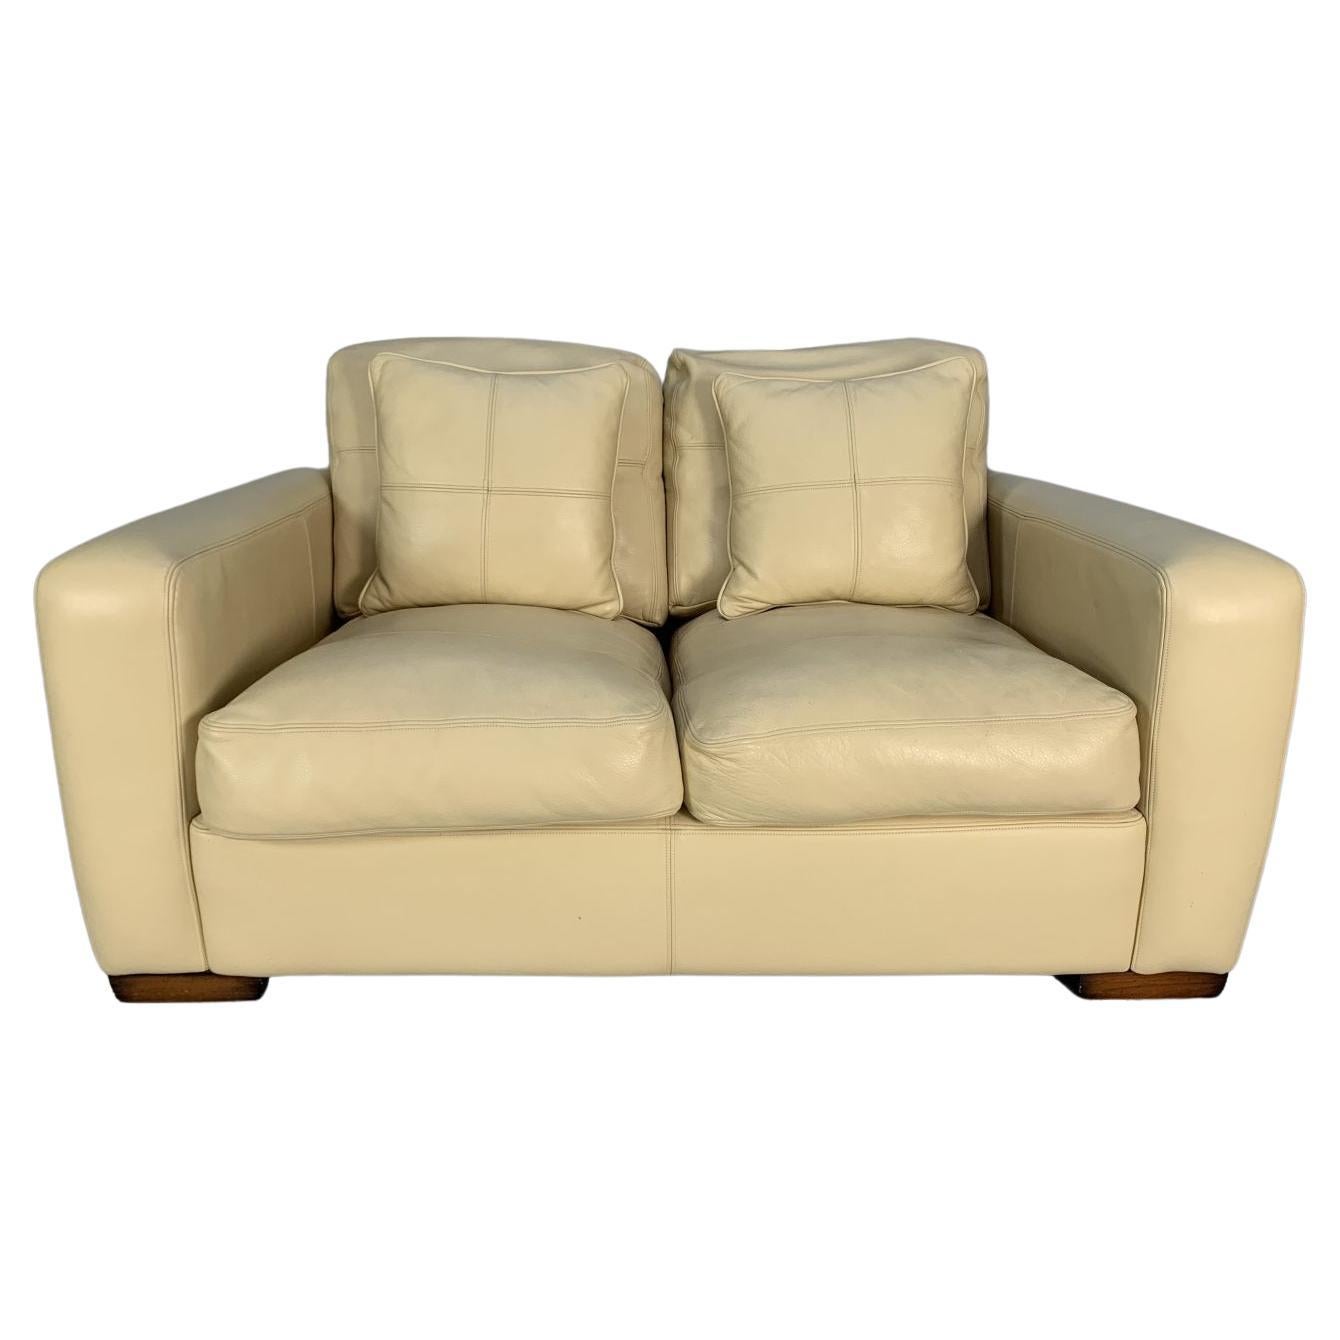 Duresta “Panther” 2-Seat Sofa – in Cream Leather For Sale